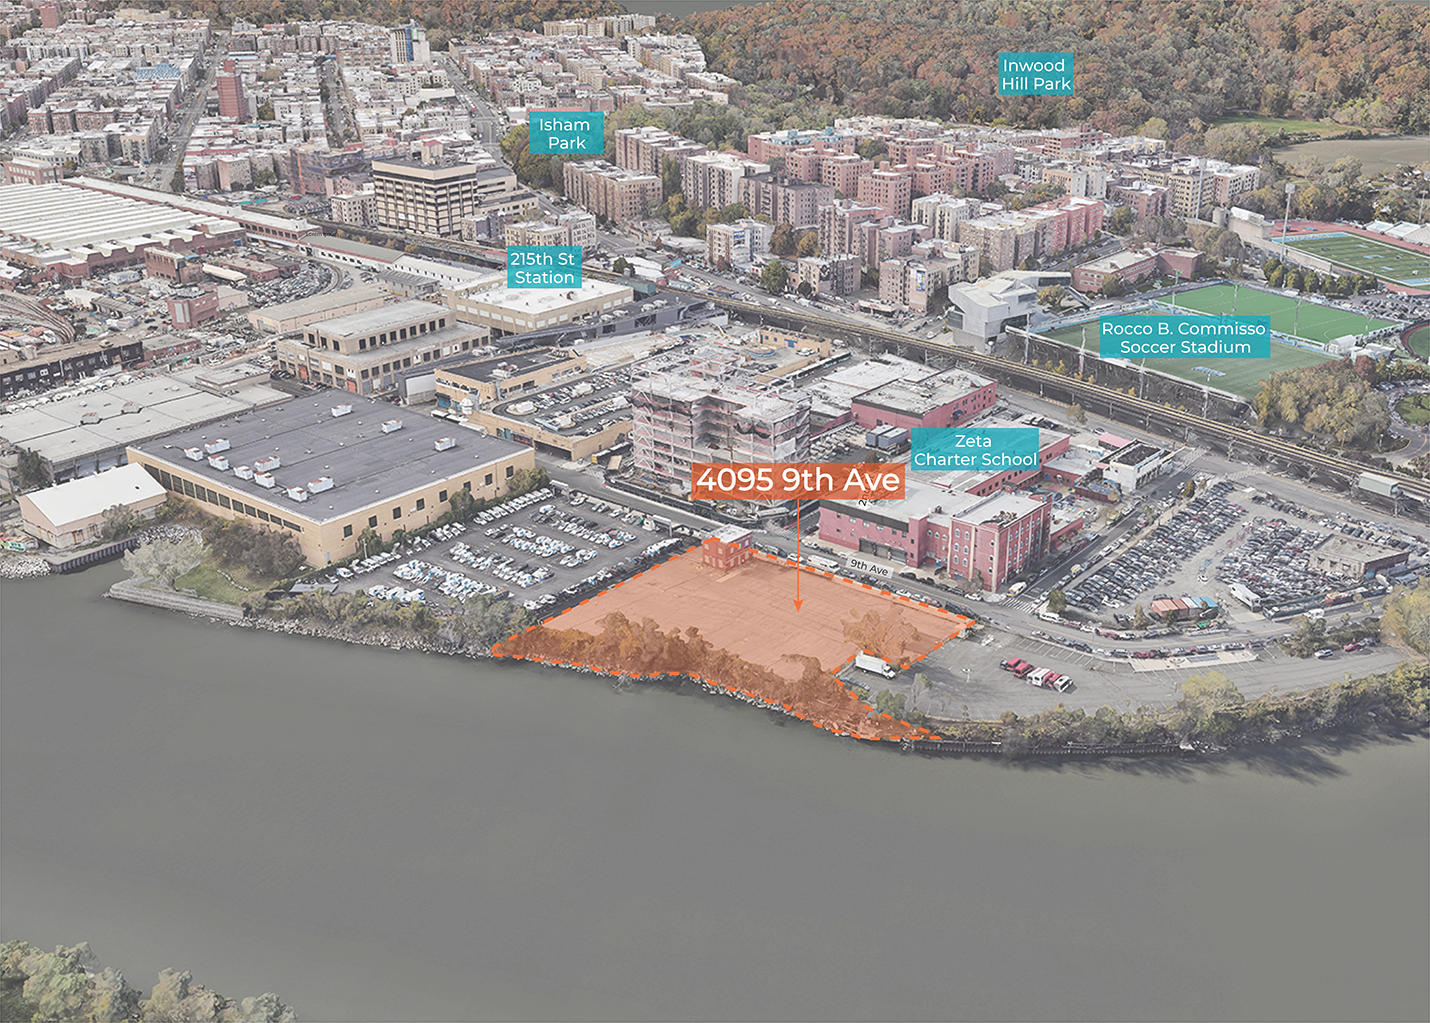 Rendering of the area for the proposed development